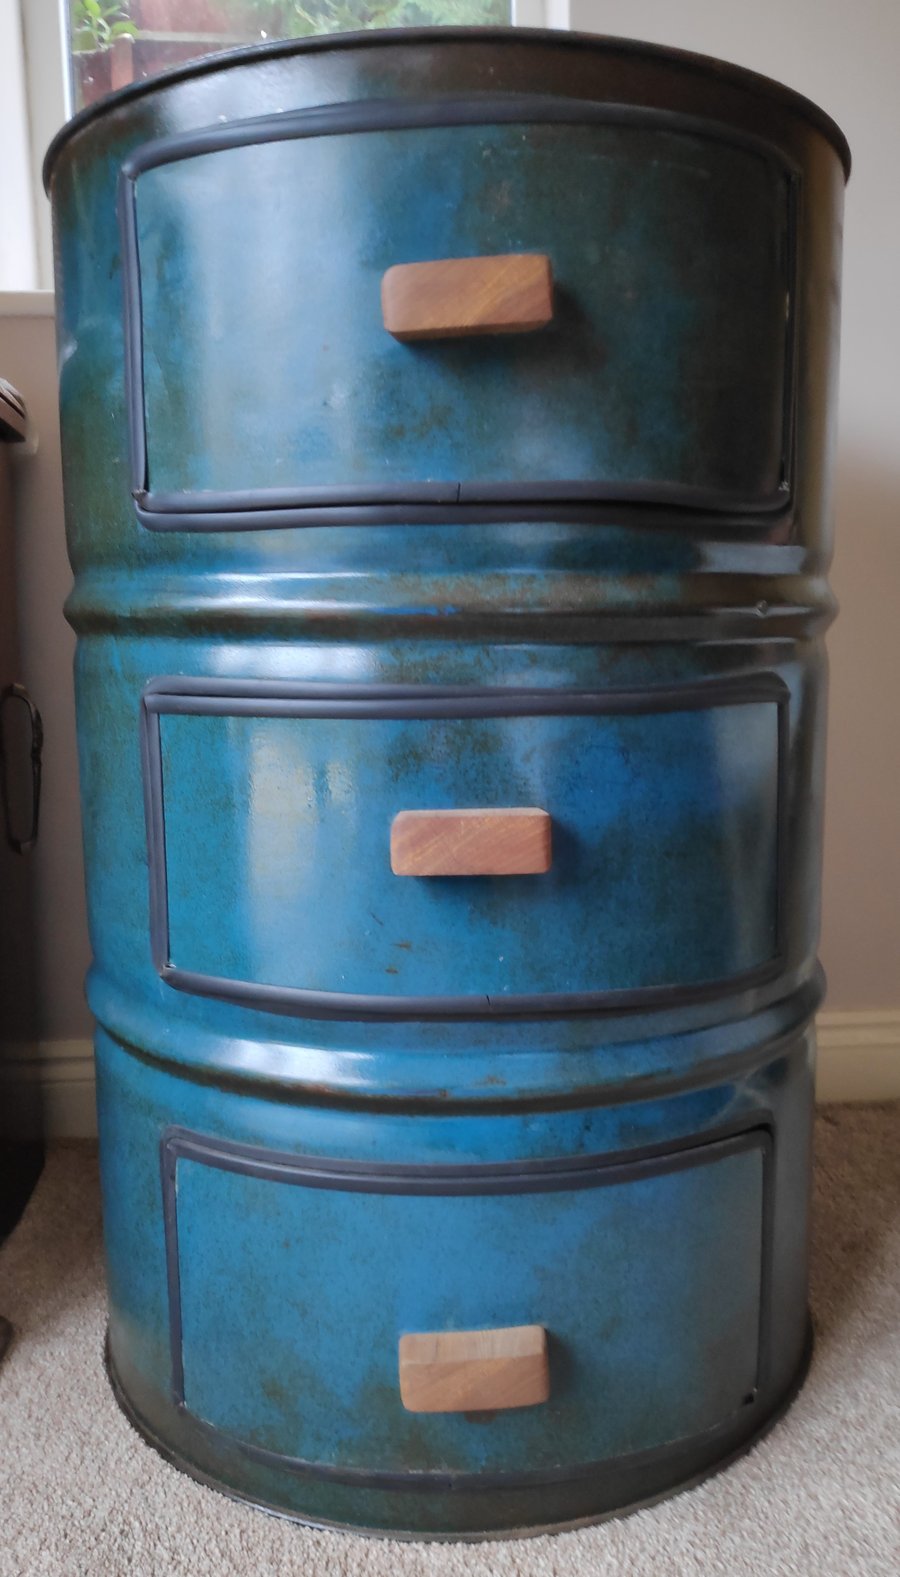 Oil Barrel Chest of Drawers - Reclaimed Industrial Furniture